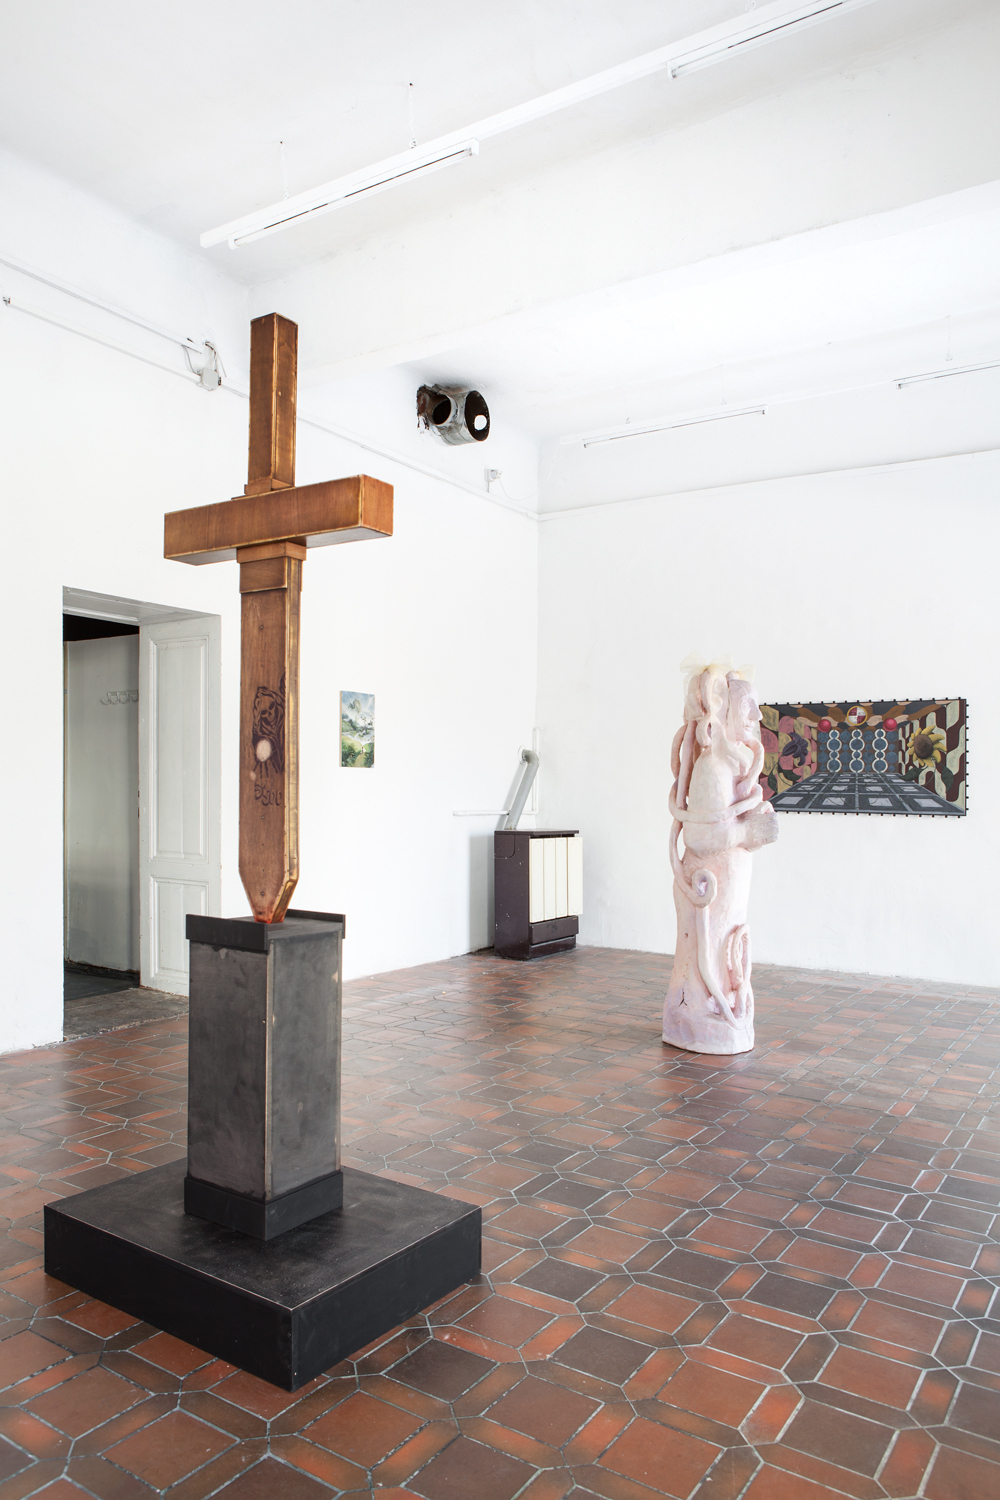 »Fioretti« curated by Yves-Michele Sass, 2020, installation view, GOMO, Vienna